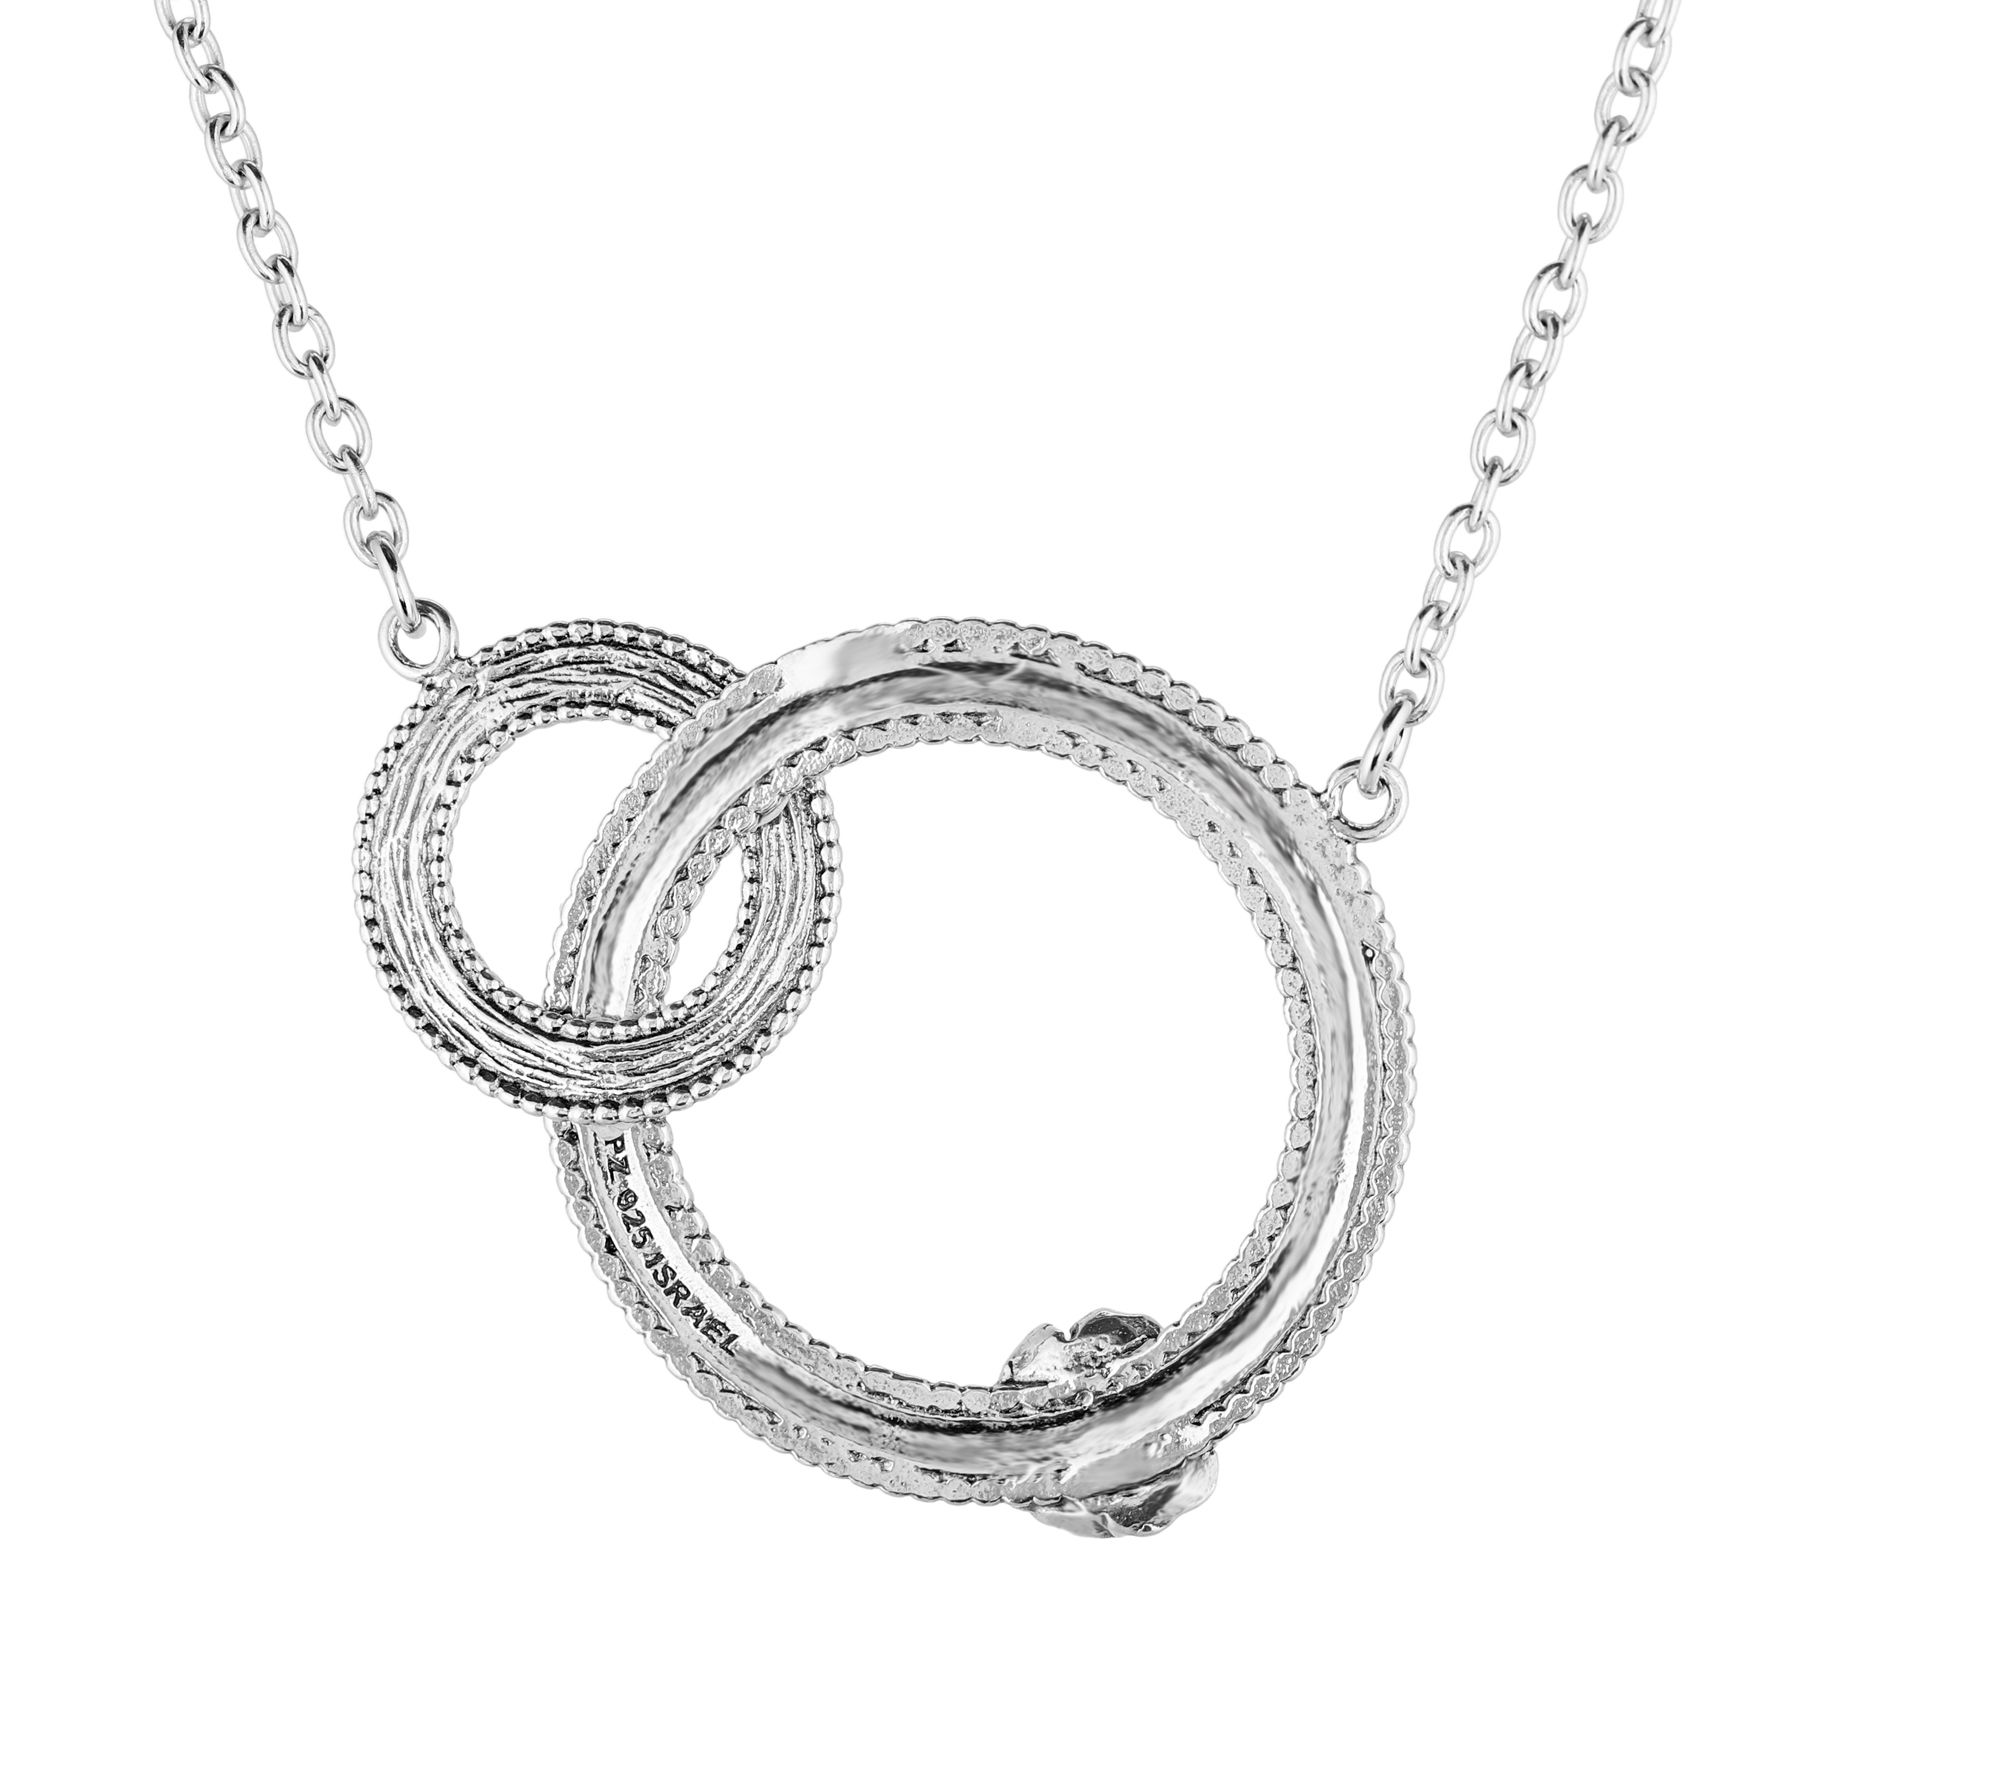 Or Paz Sterling Silver Beaded Rose Necklace - QVC.com